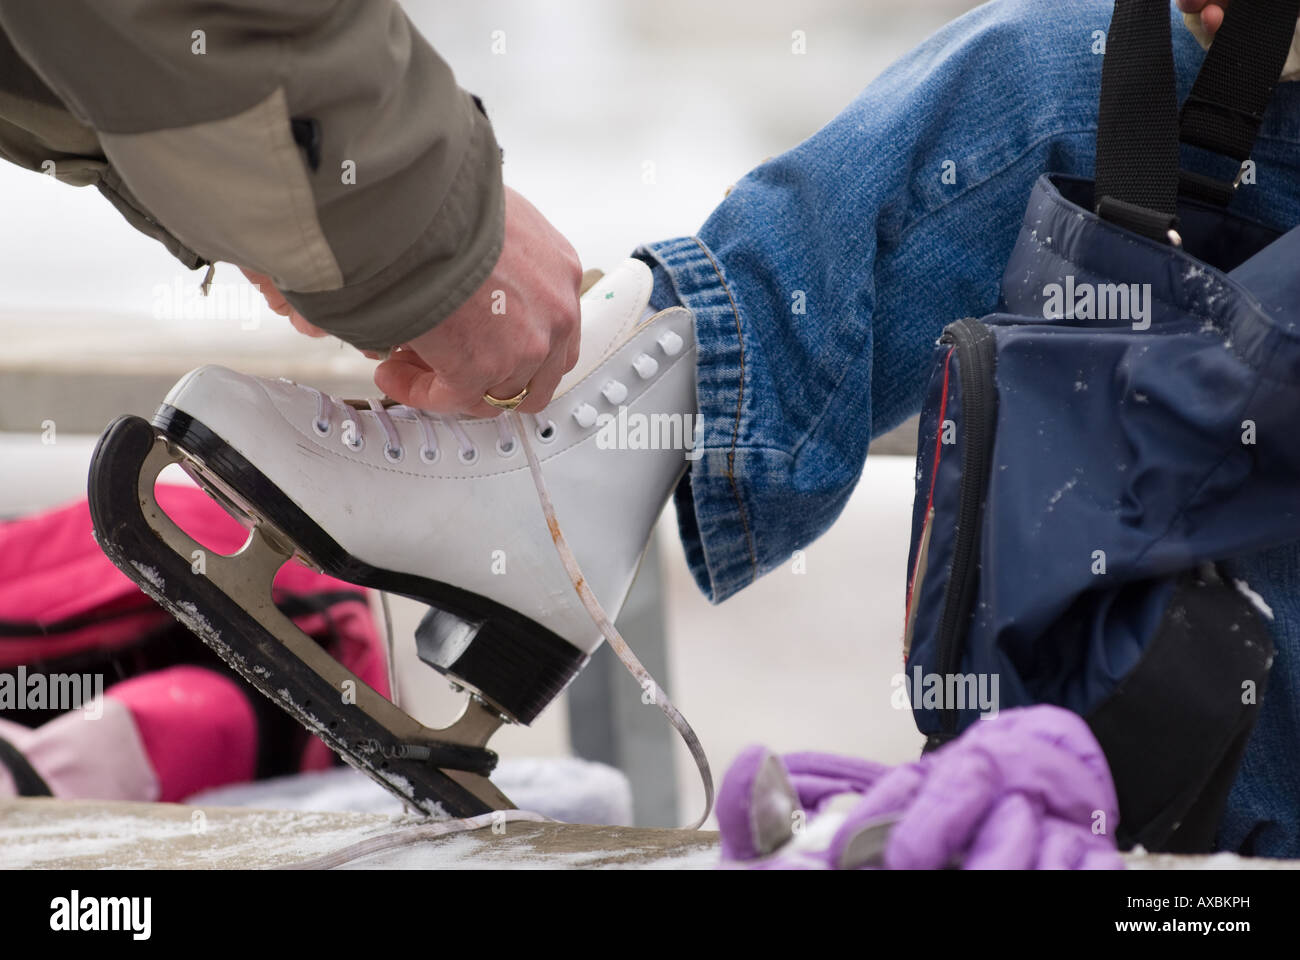 A young girl looks on as her father helps tie on ice skate during Kingstons annual FebFest winter activities Stock Photo